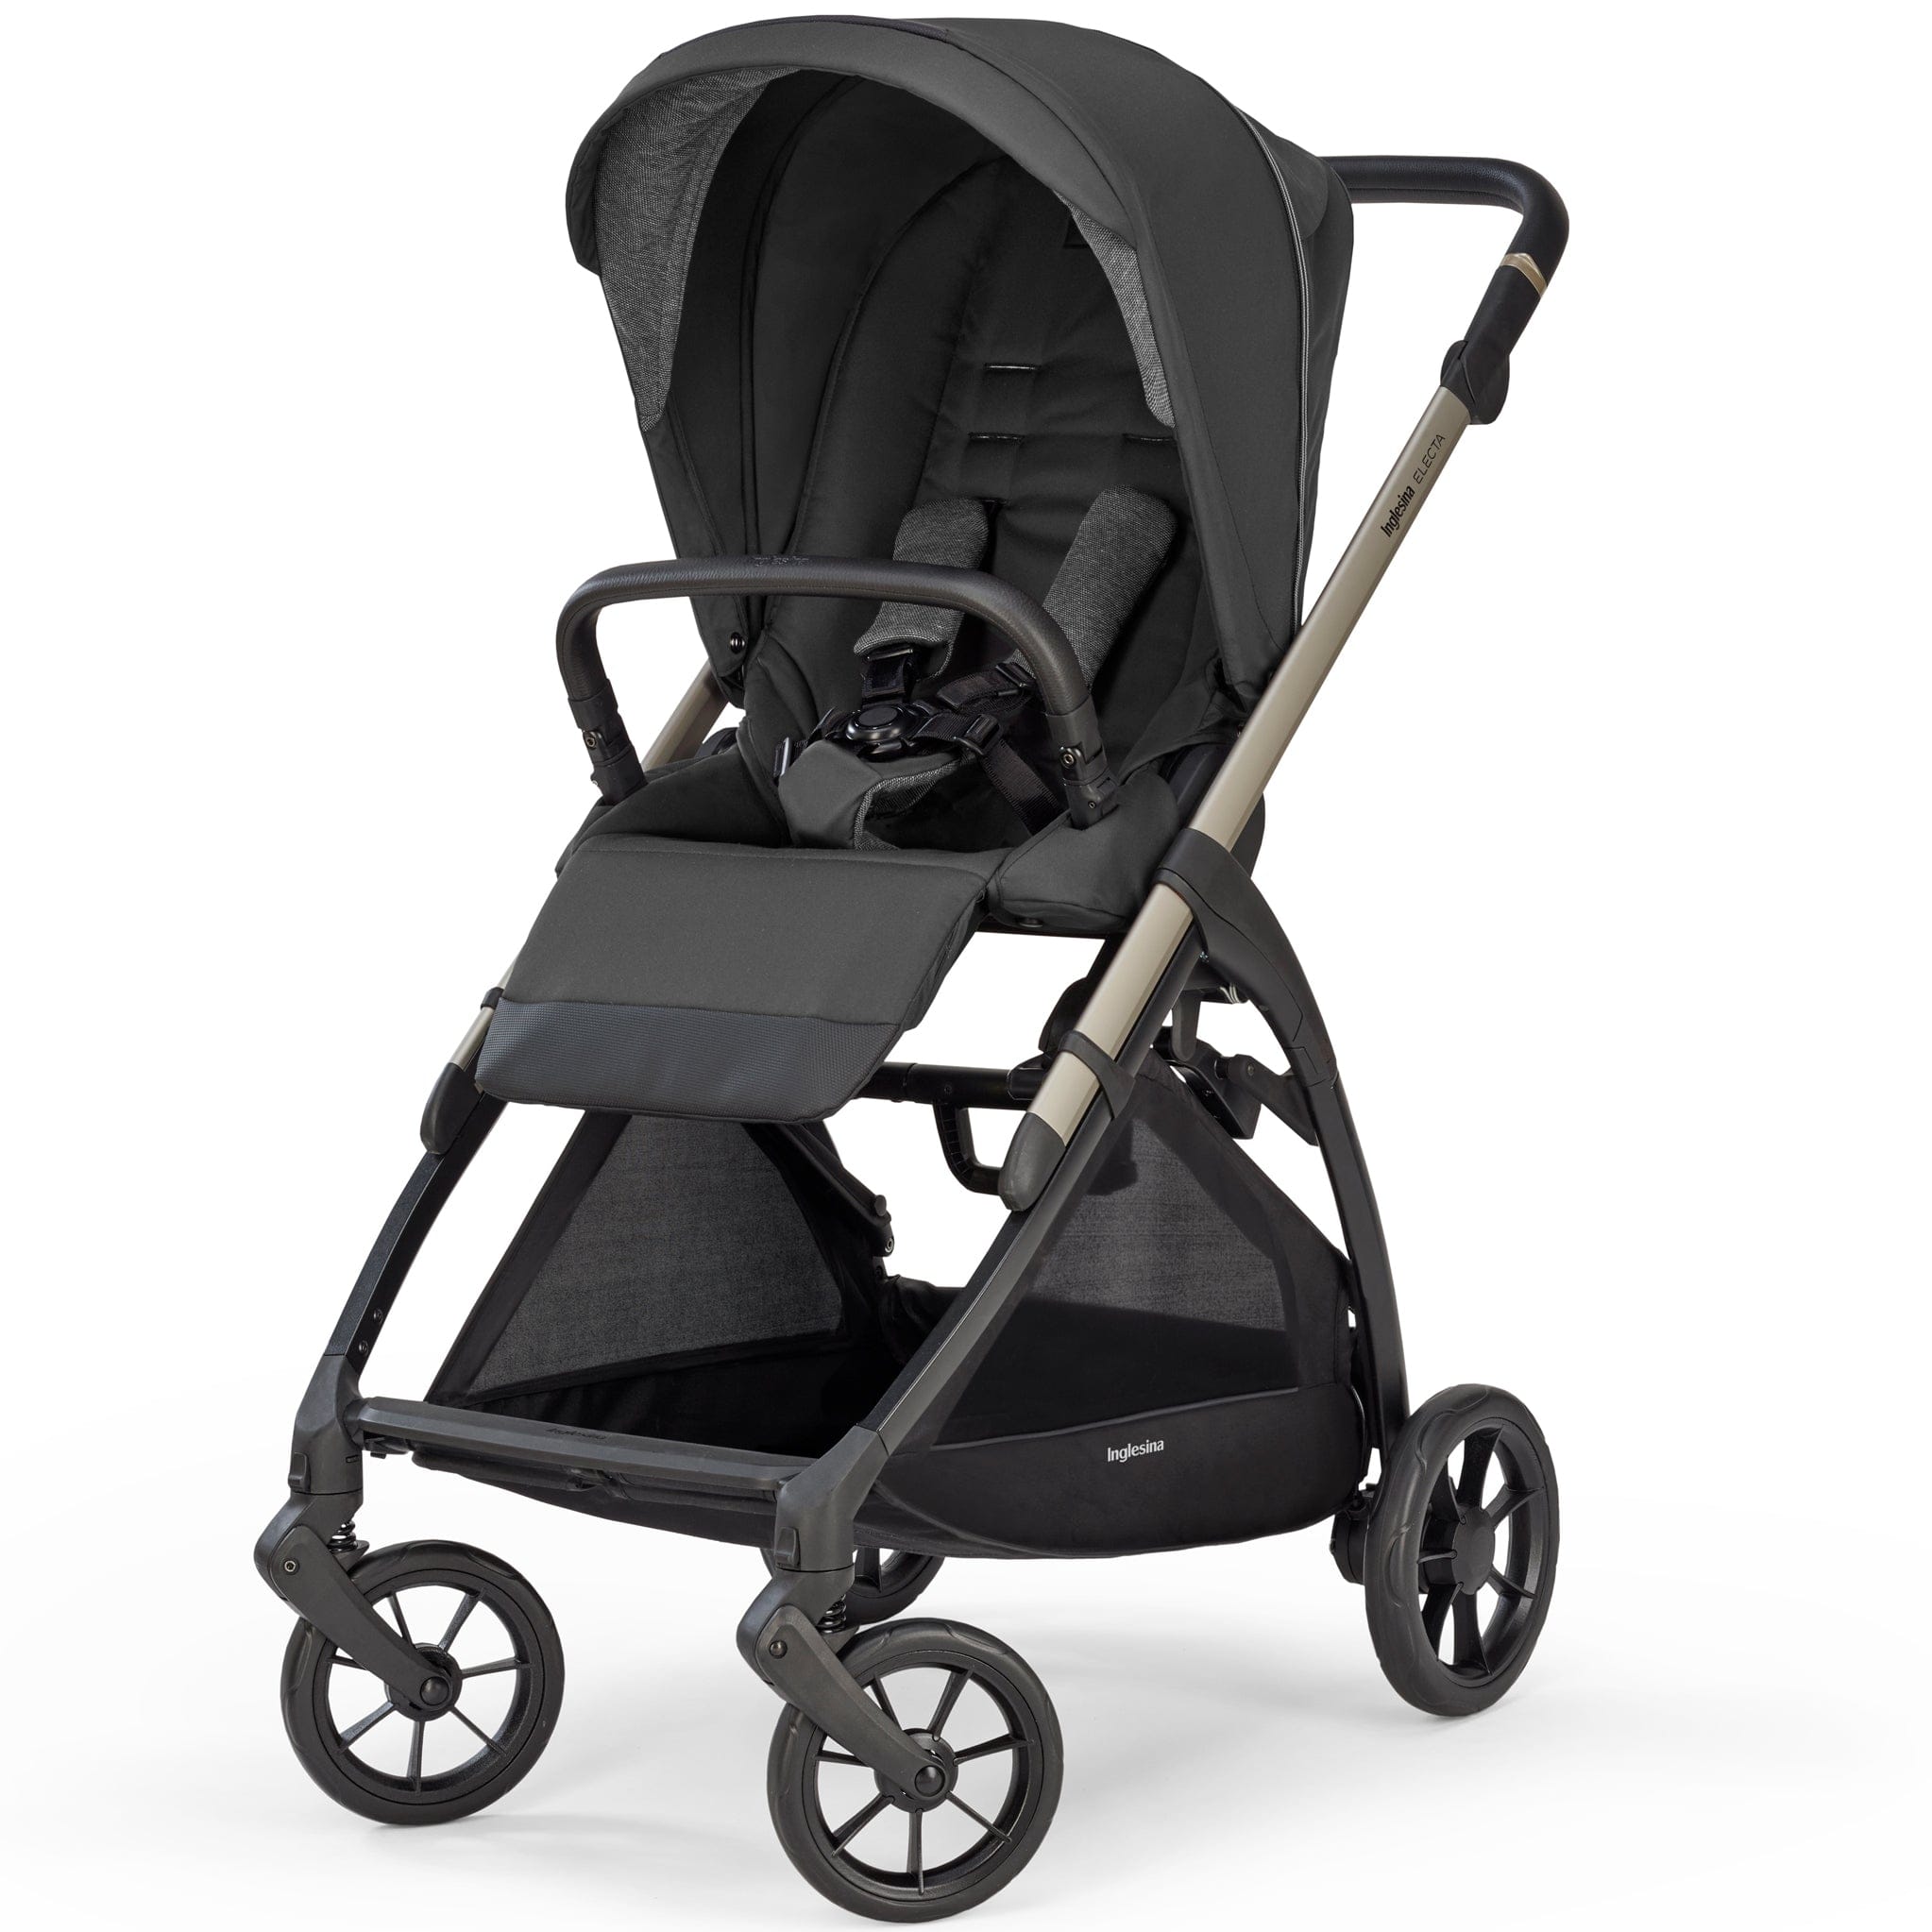 Inglesina travel systems Inglesina Electa System Quattro in Upper Black with Darwin car seat and i-Size base ELC-UPP-BLK